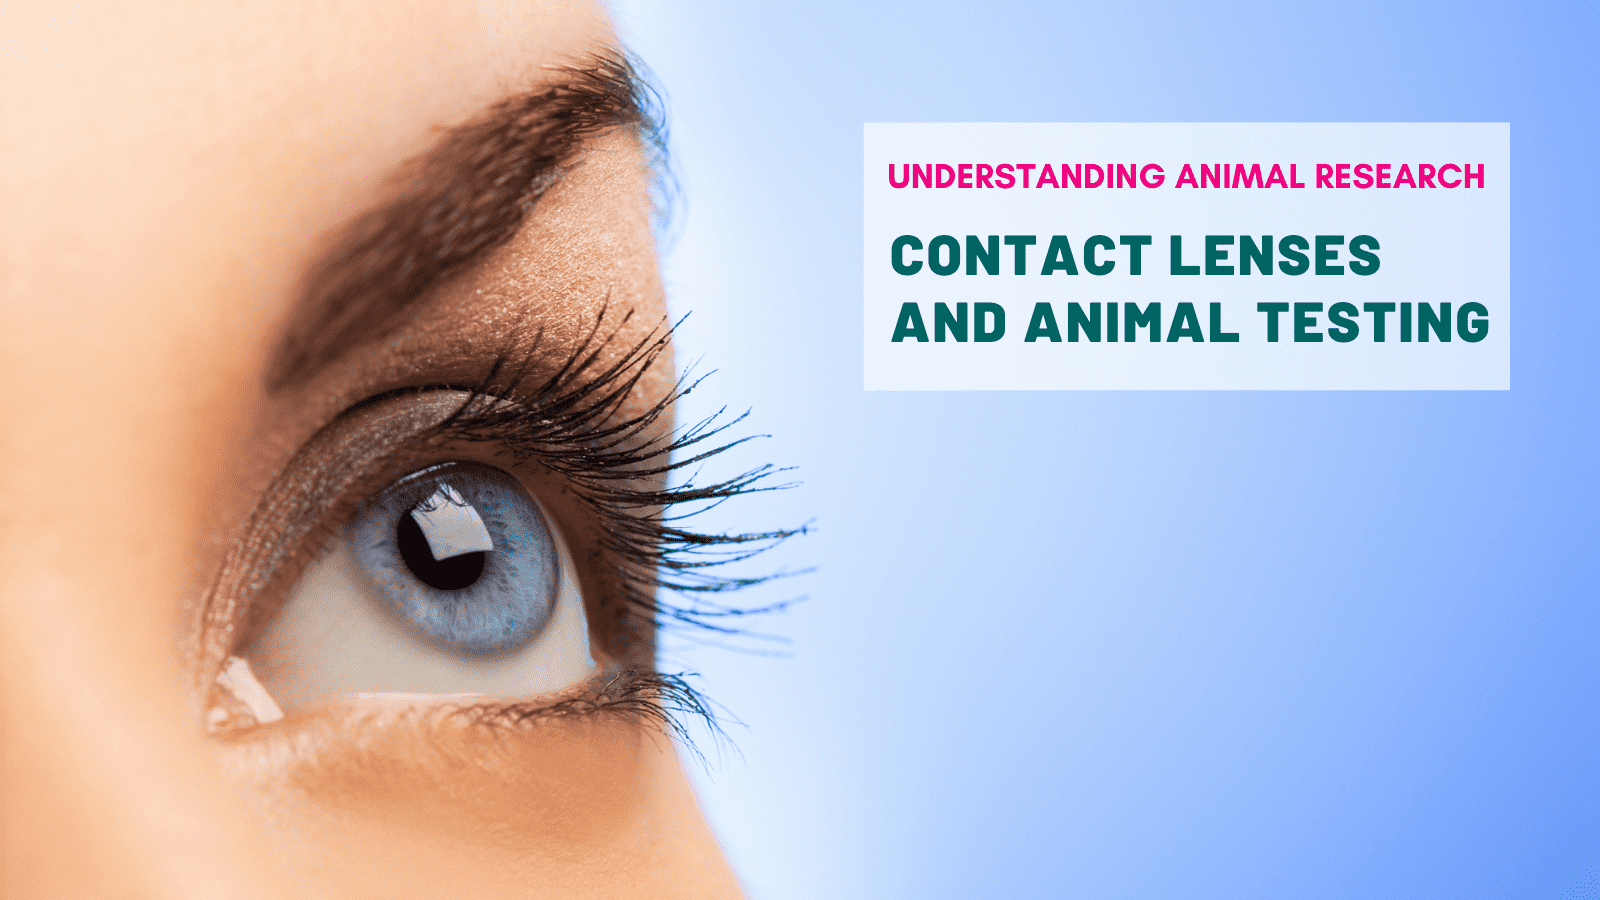 Contact lenses and animal testing